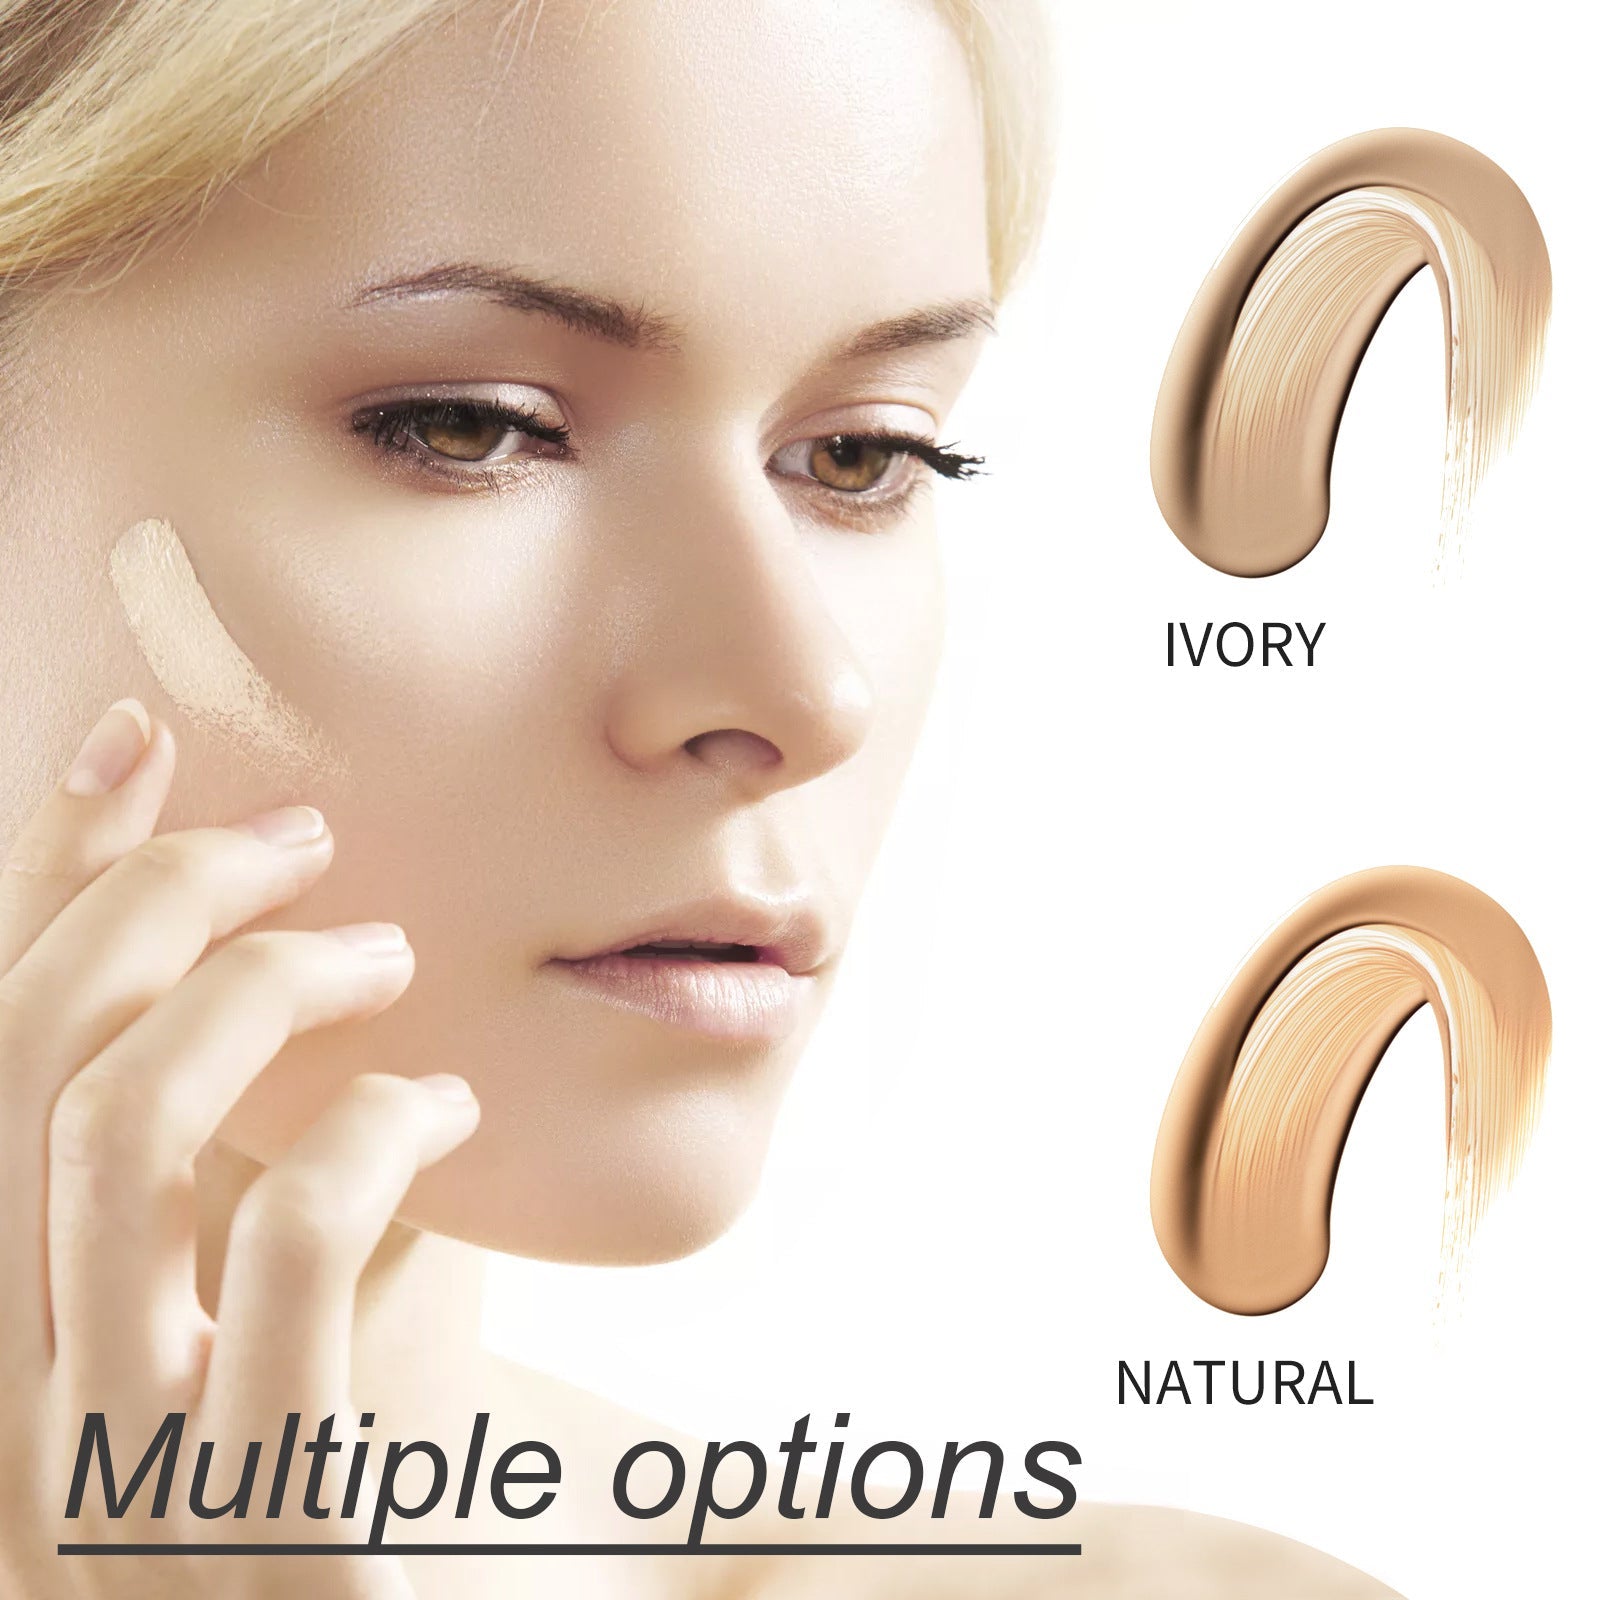 Natural Ivory White Makeup Primer - Your Flawless Foundation Begins Here LA ROSE BEAUTY